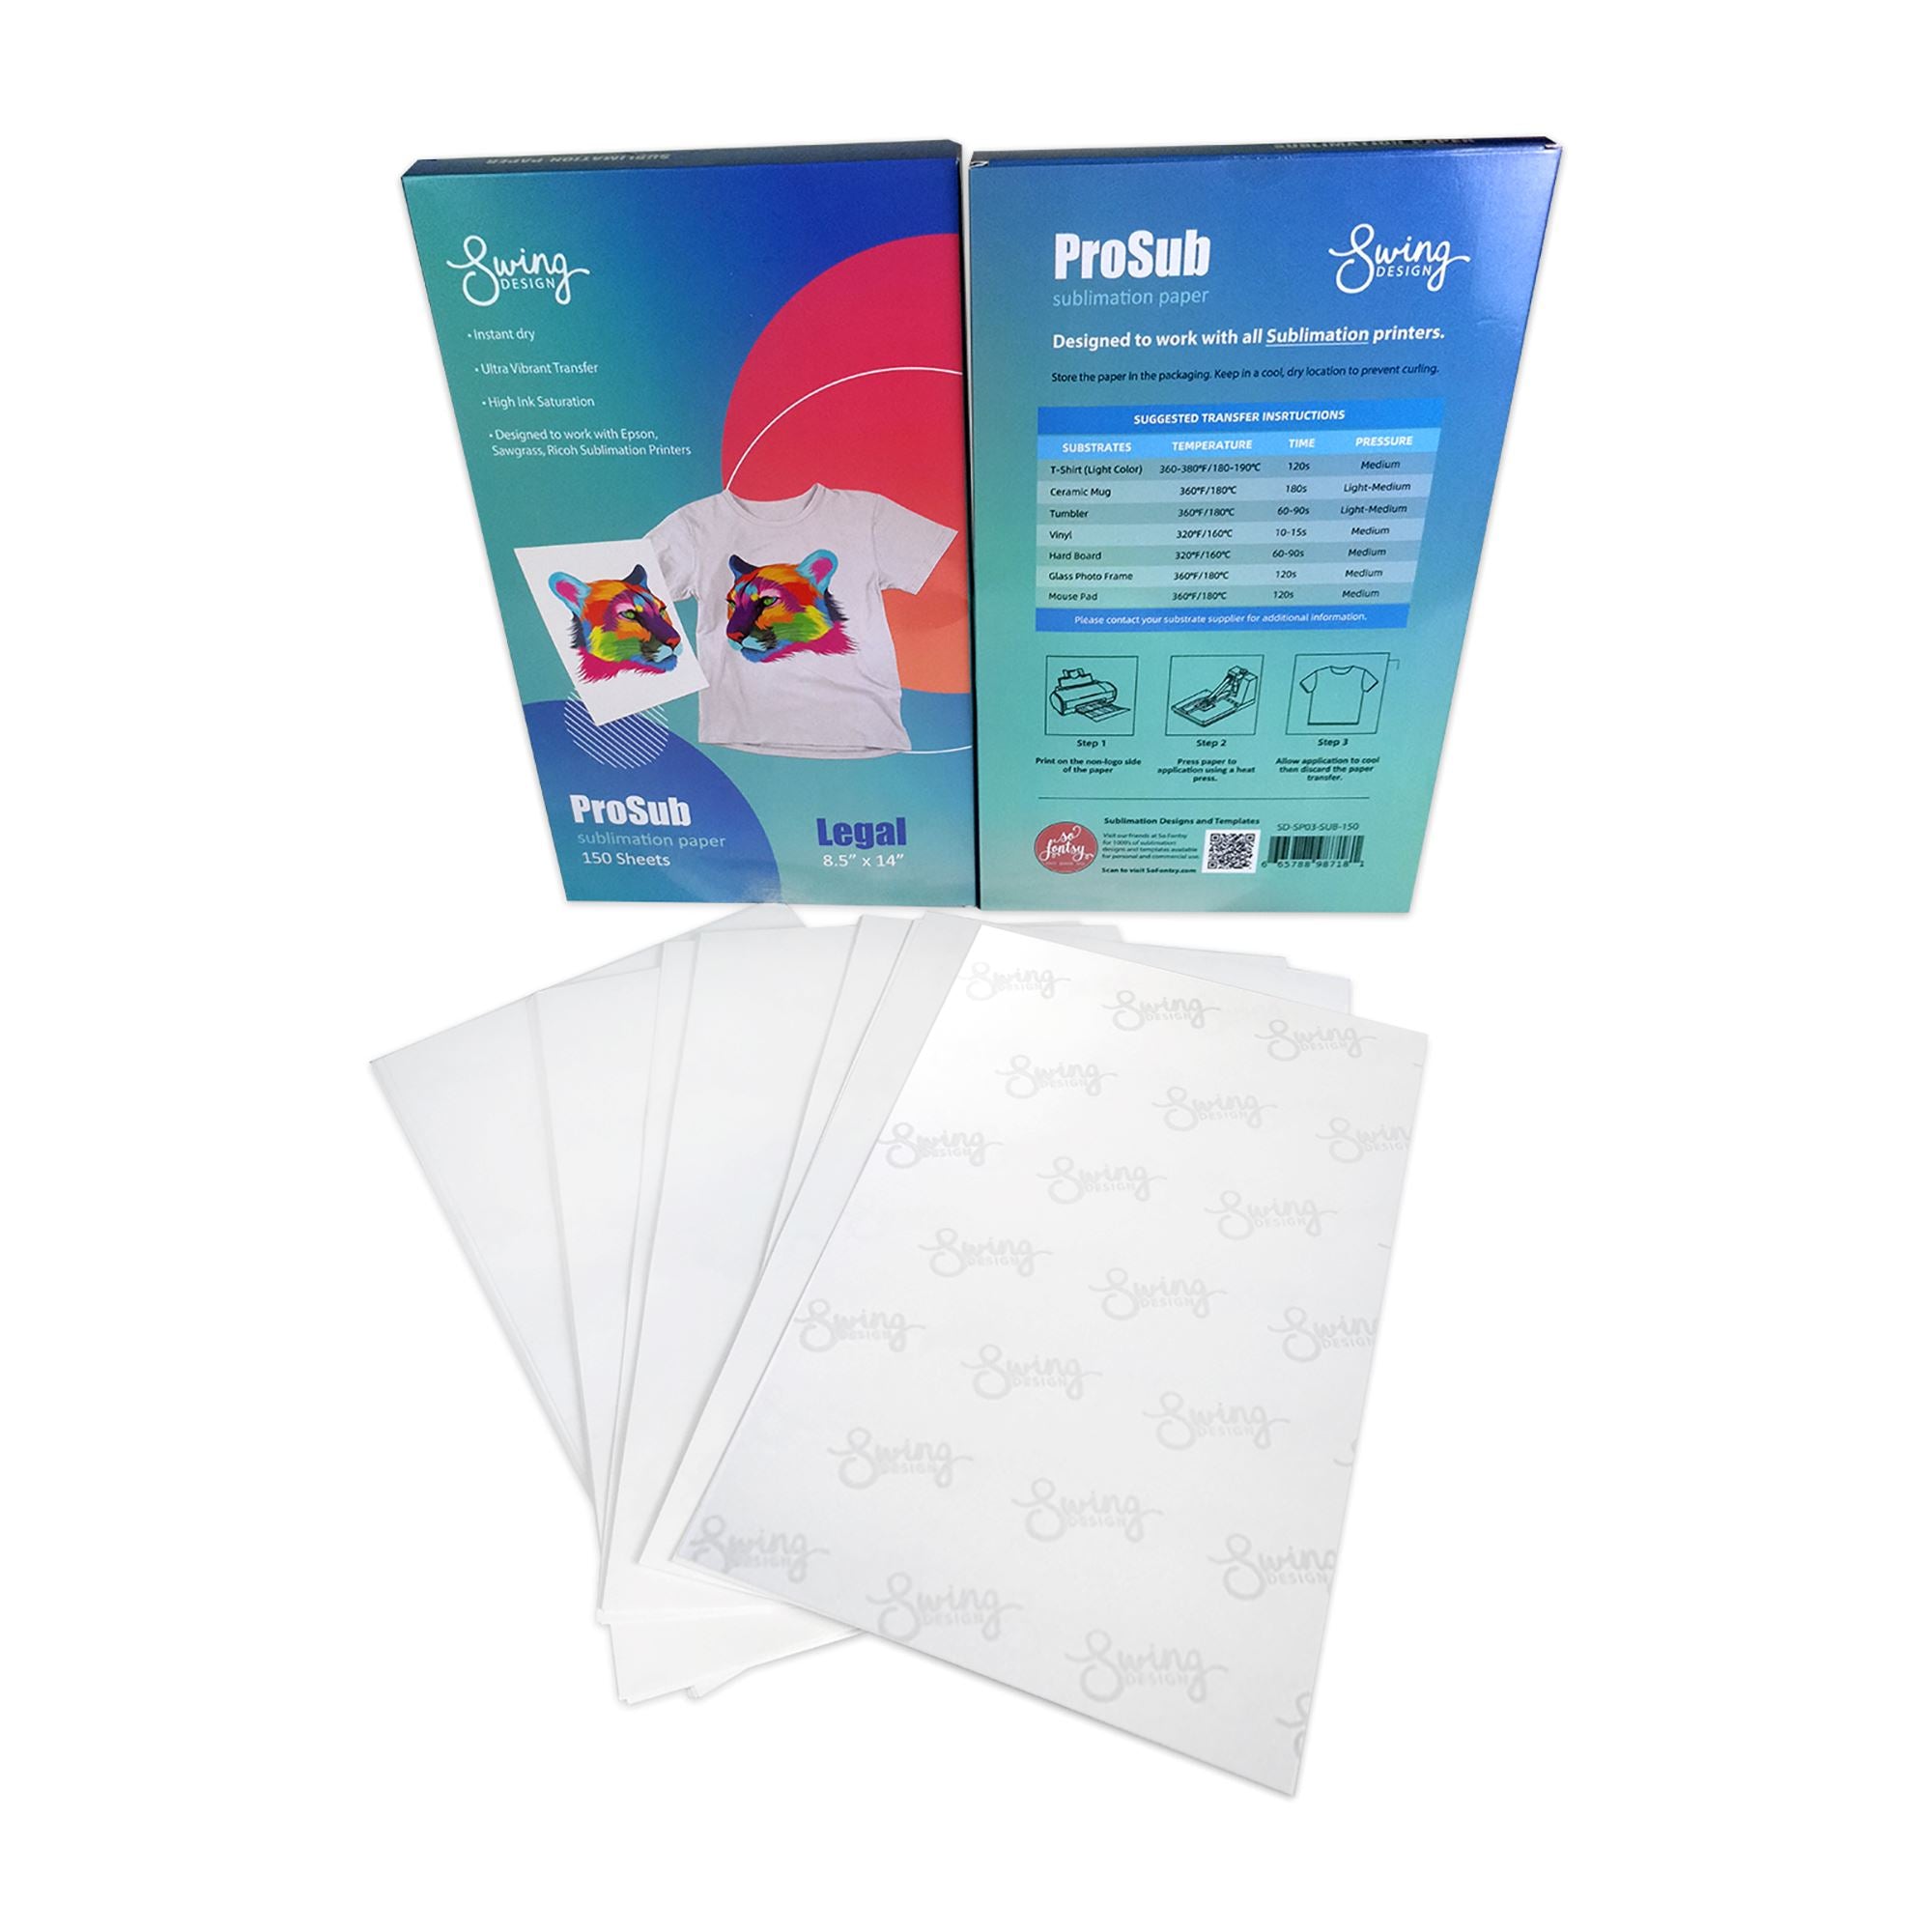 SUBLIPAPER Dye Sublimation Transfer Paper for Sawgrass, Epson and Brother  100 Sheets 13x19 per Pack